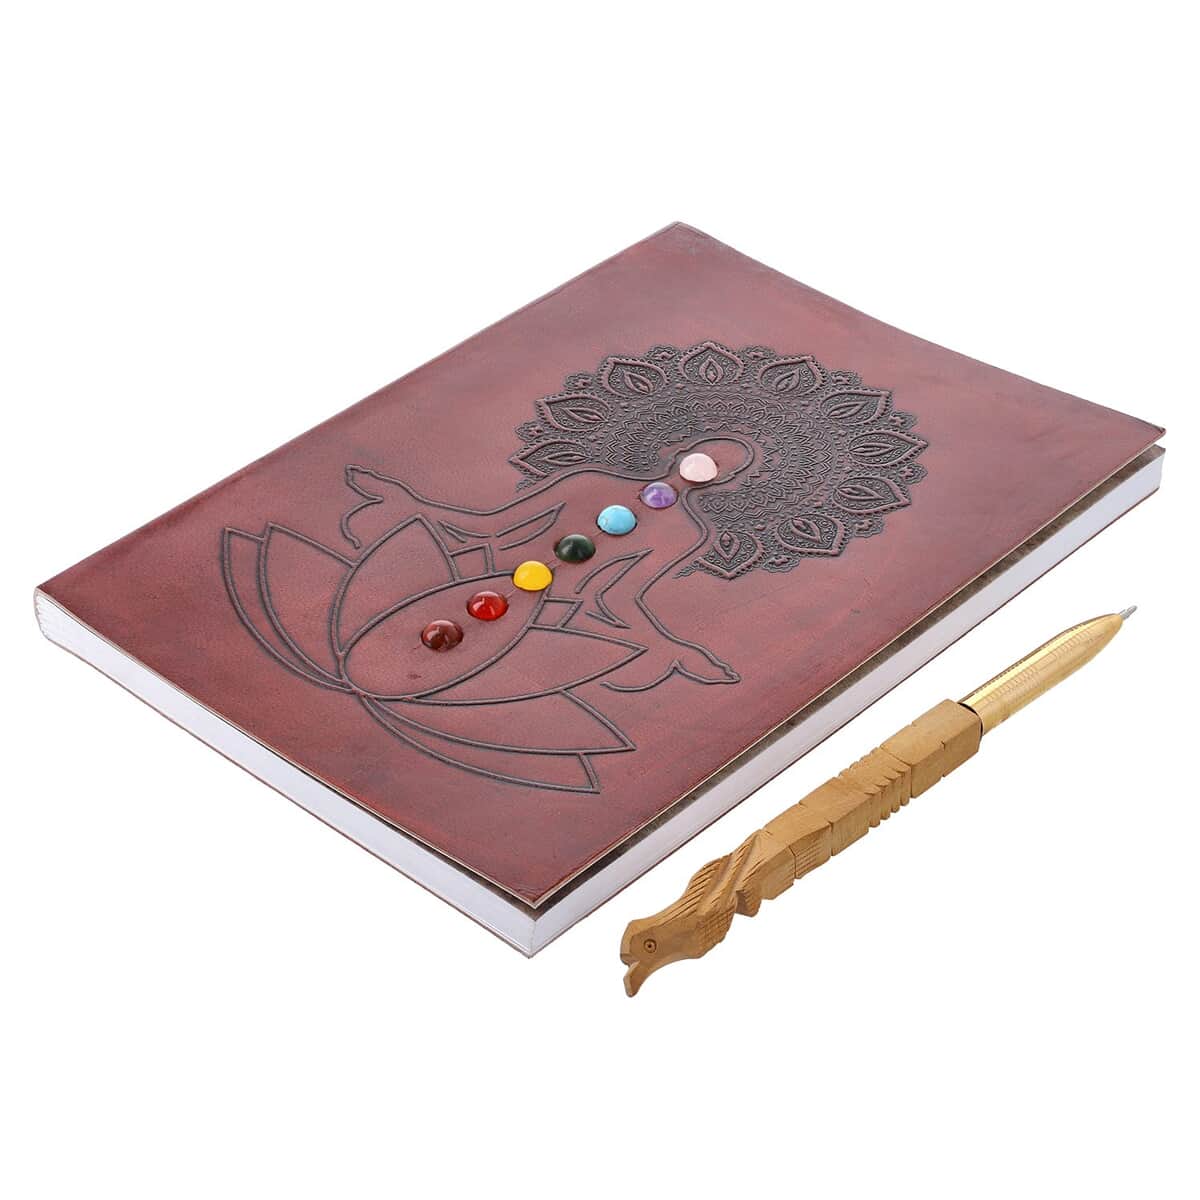 Meditation Pose Embossed Seven Chakra Gemstone Leather Diary and Carved Wooden Pen - Maroon image number 0